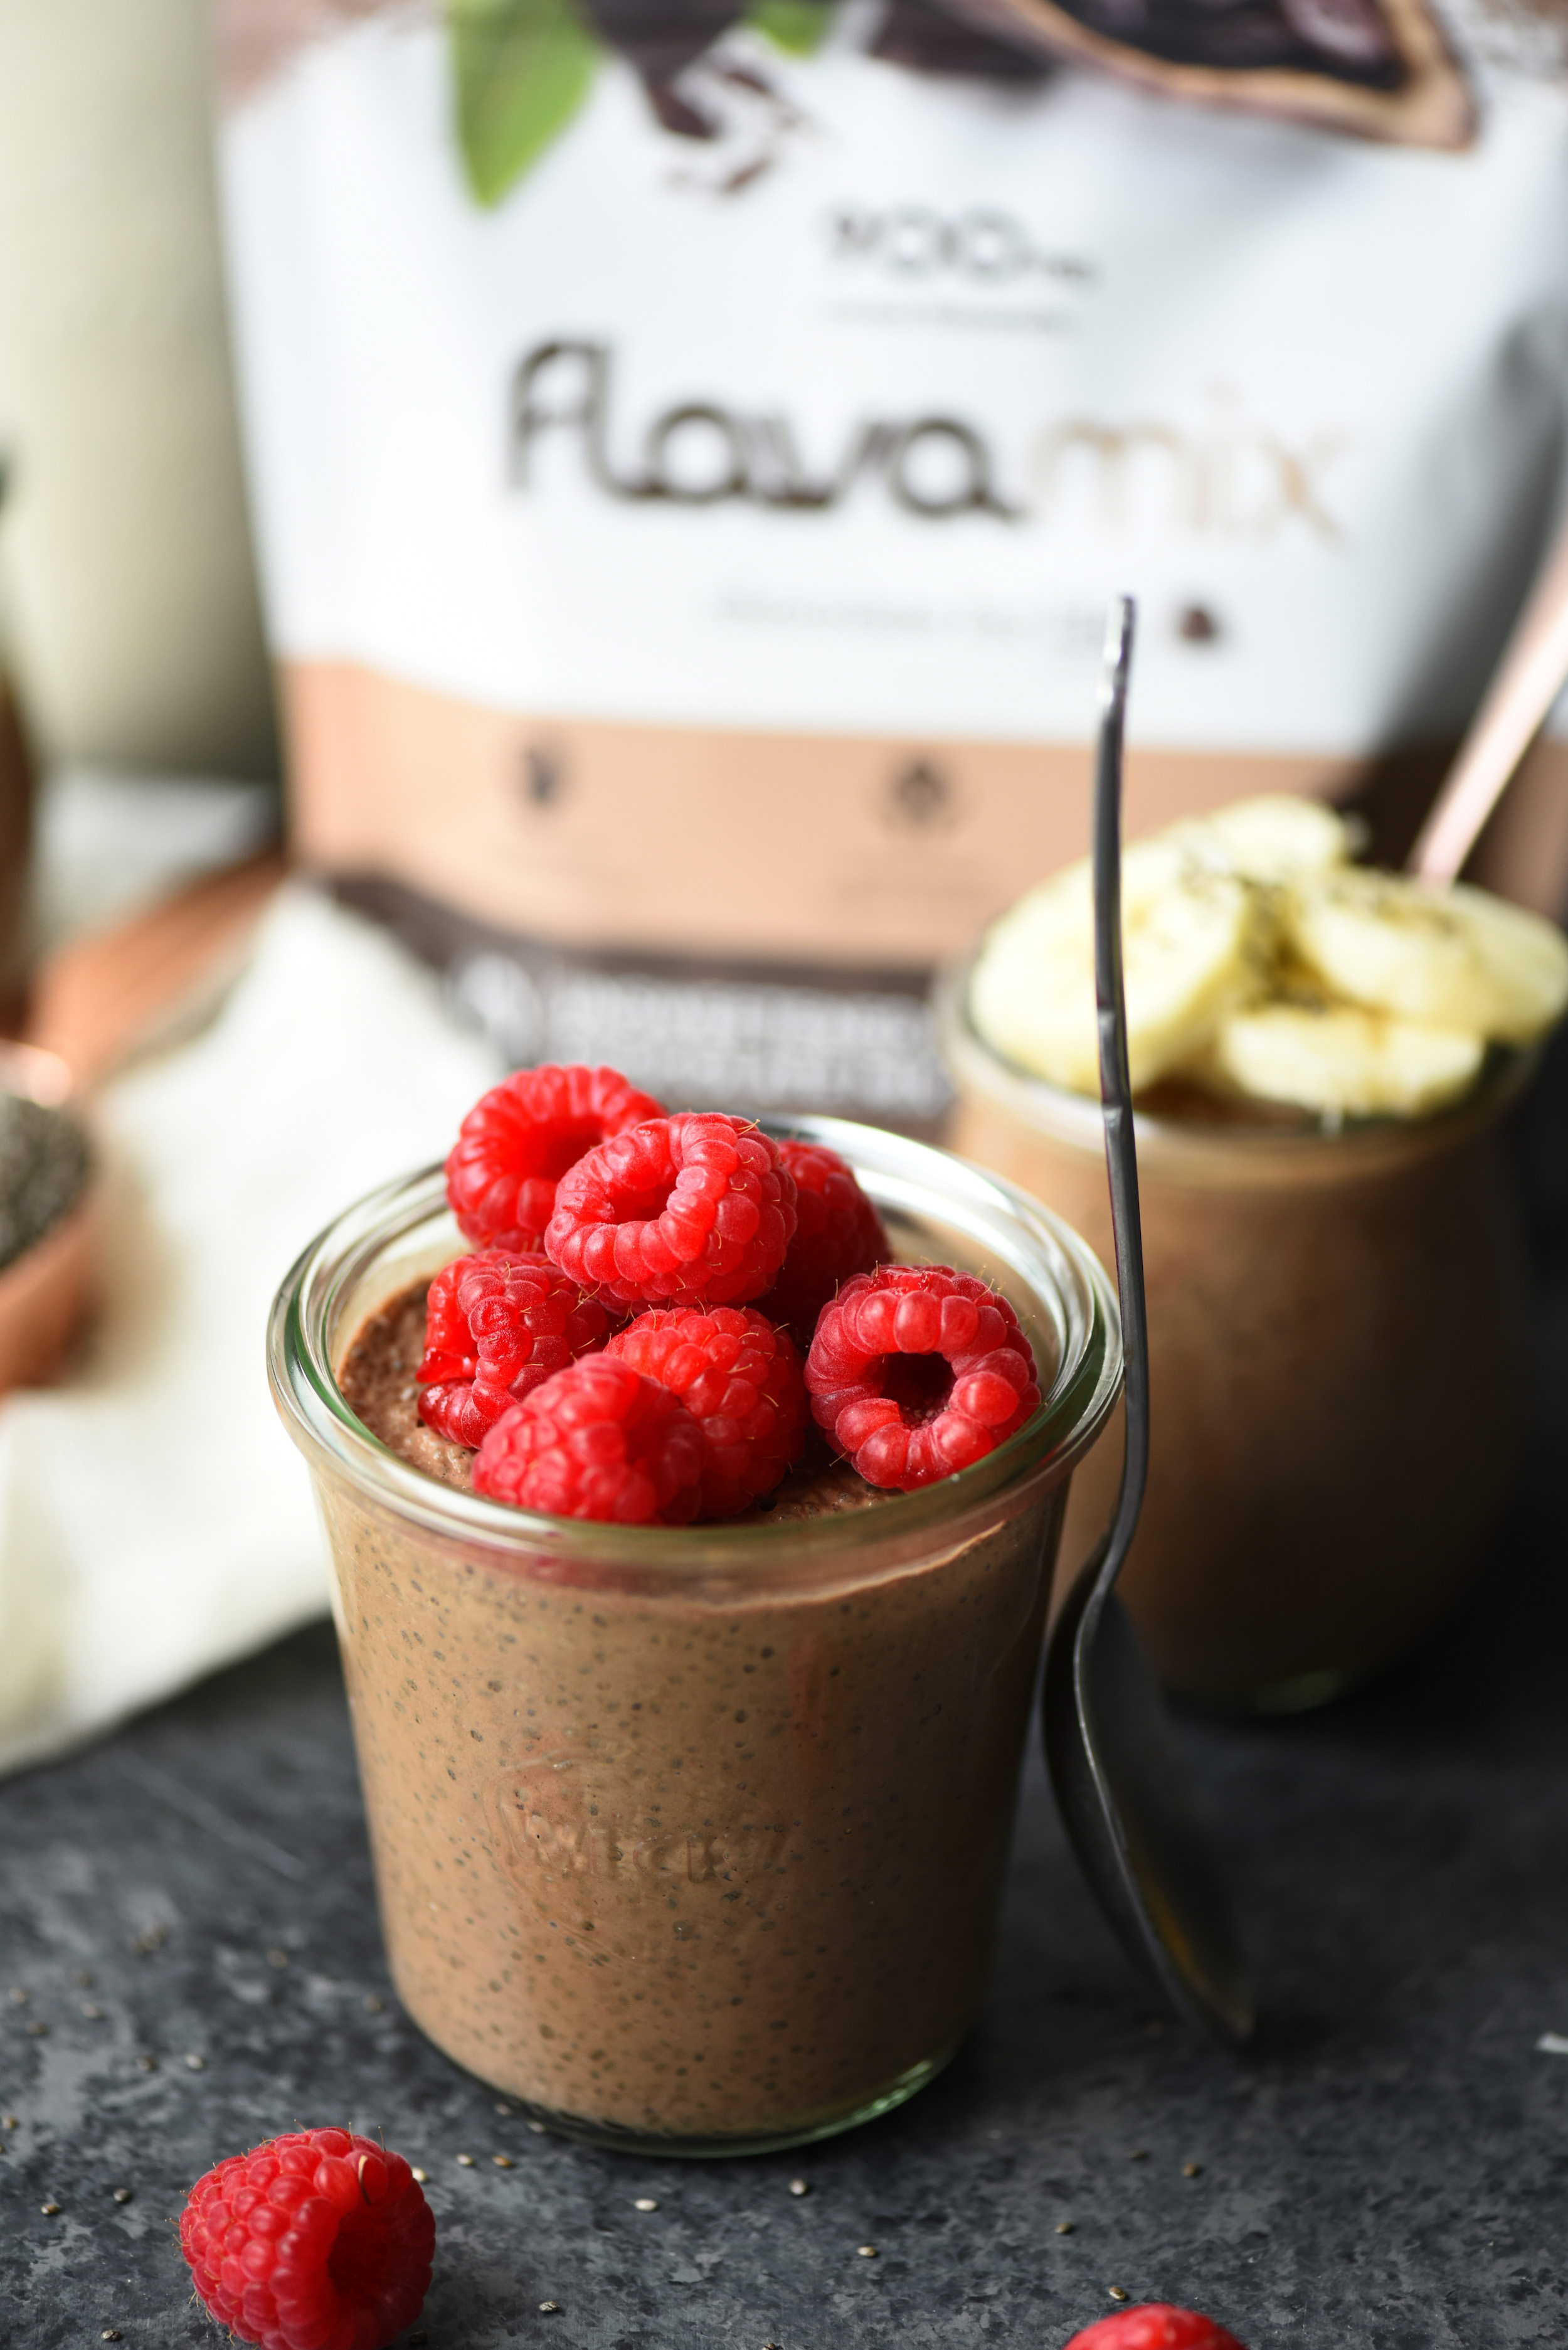 Chocolate Chia Pudding with Fresh Berries, FlavaMix Unsweetened Drinking Chocolate, 900mg Cocoa Flavanols